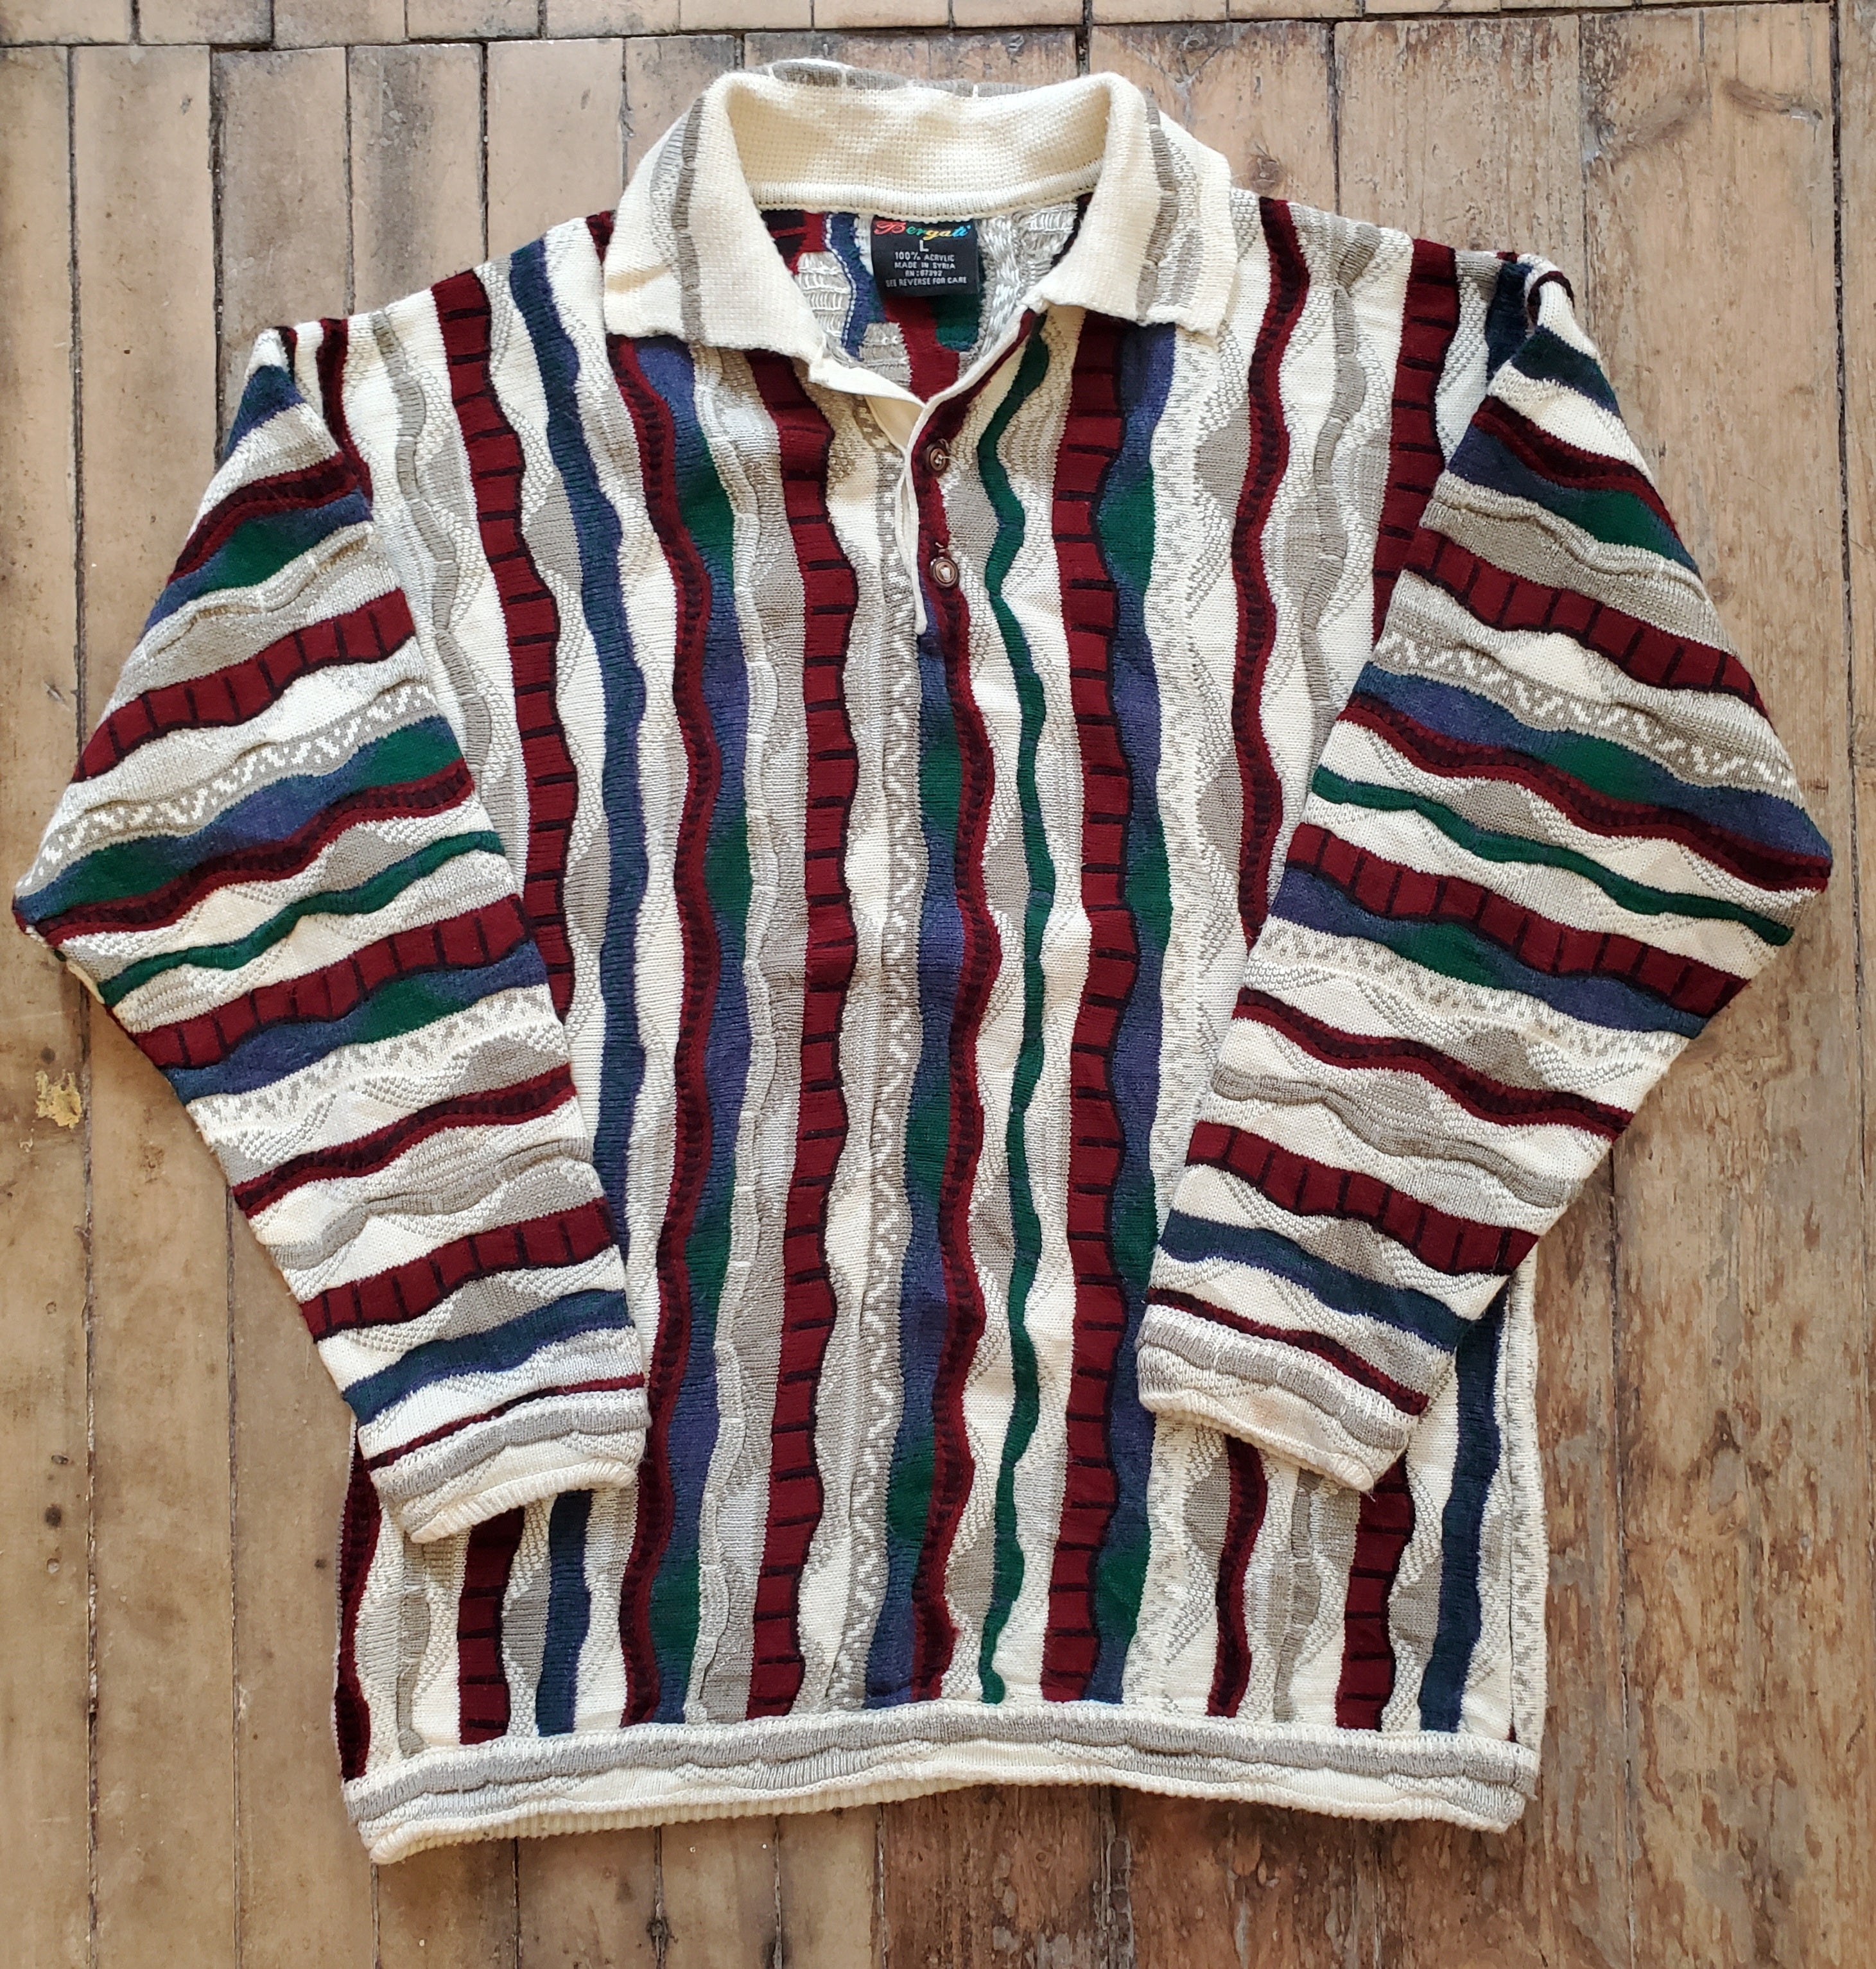 80’s Patterned Sweater